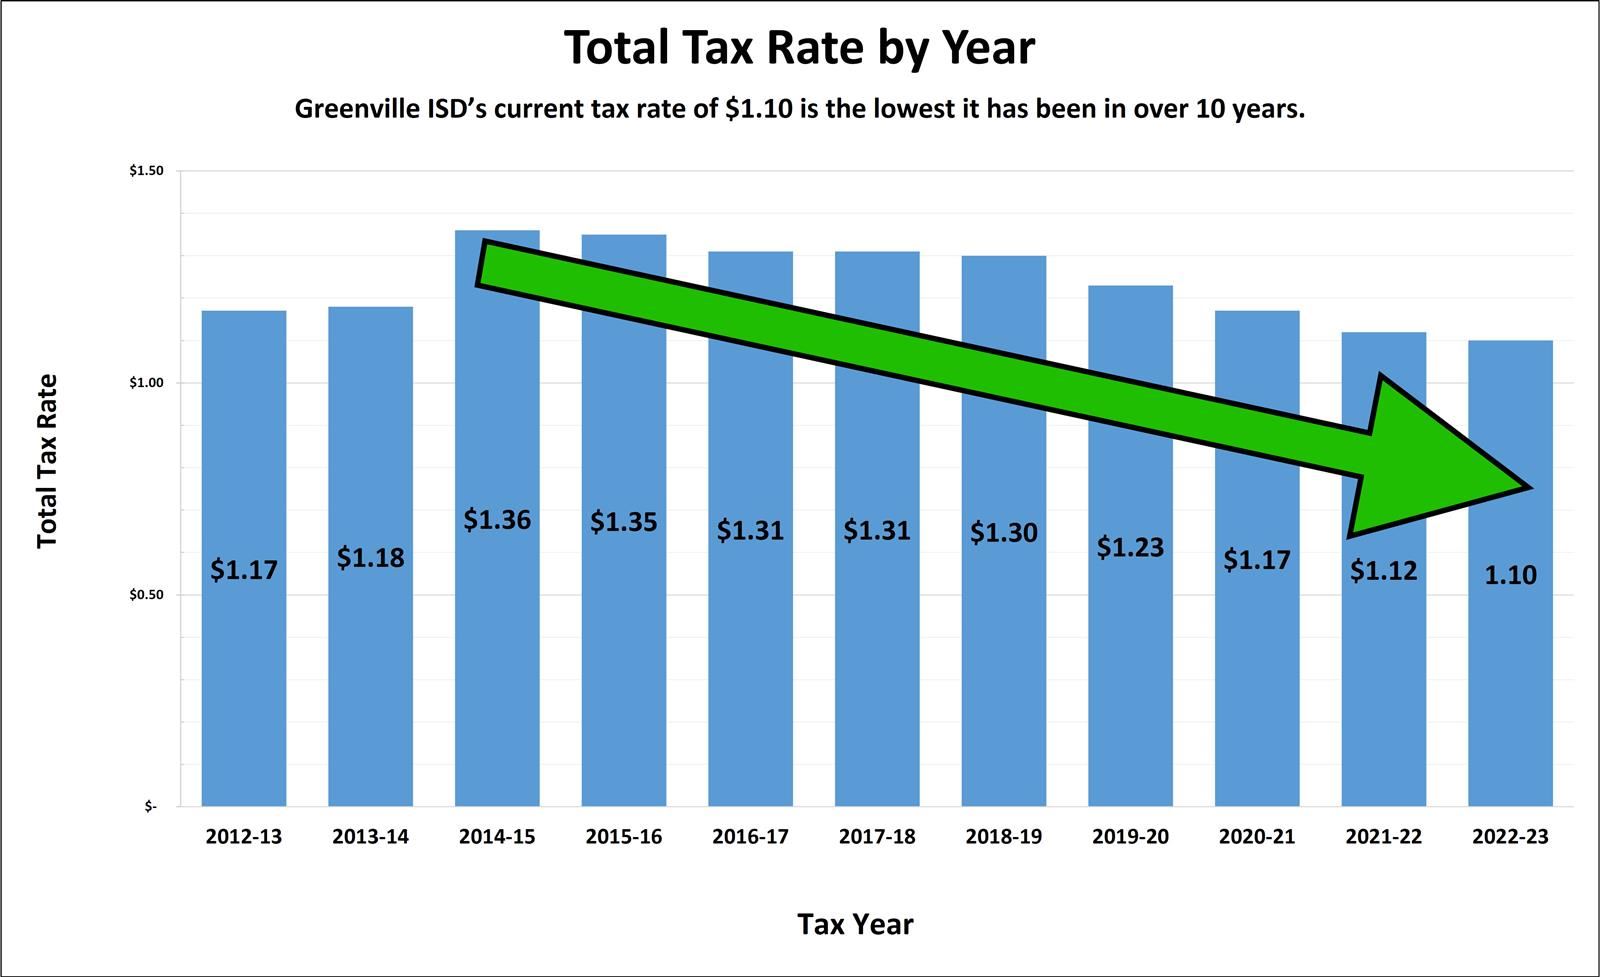 GISD School Board reduces tax rate to lowest in over 10 years